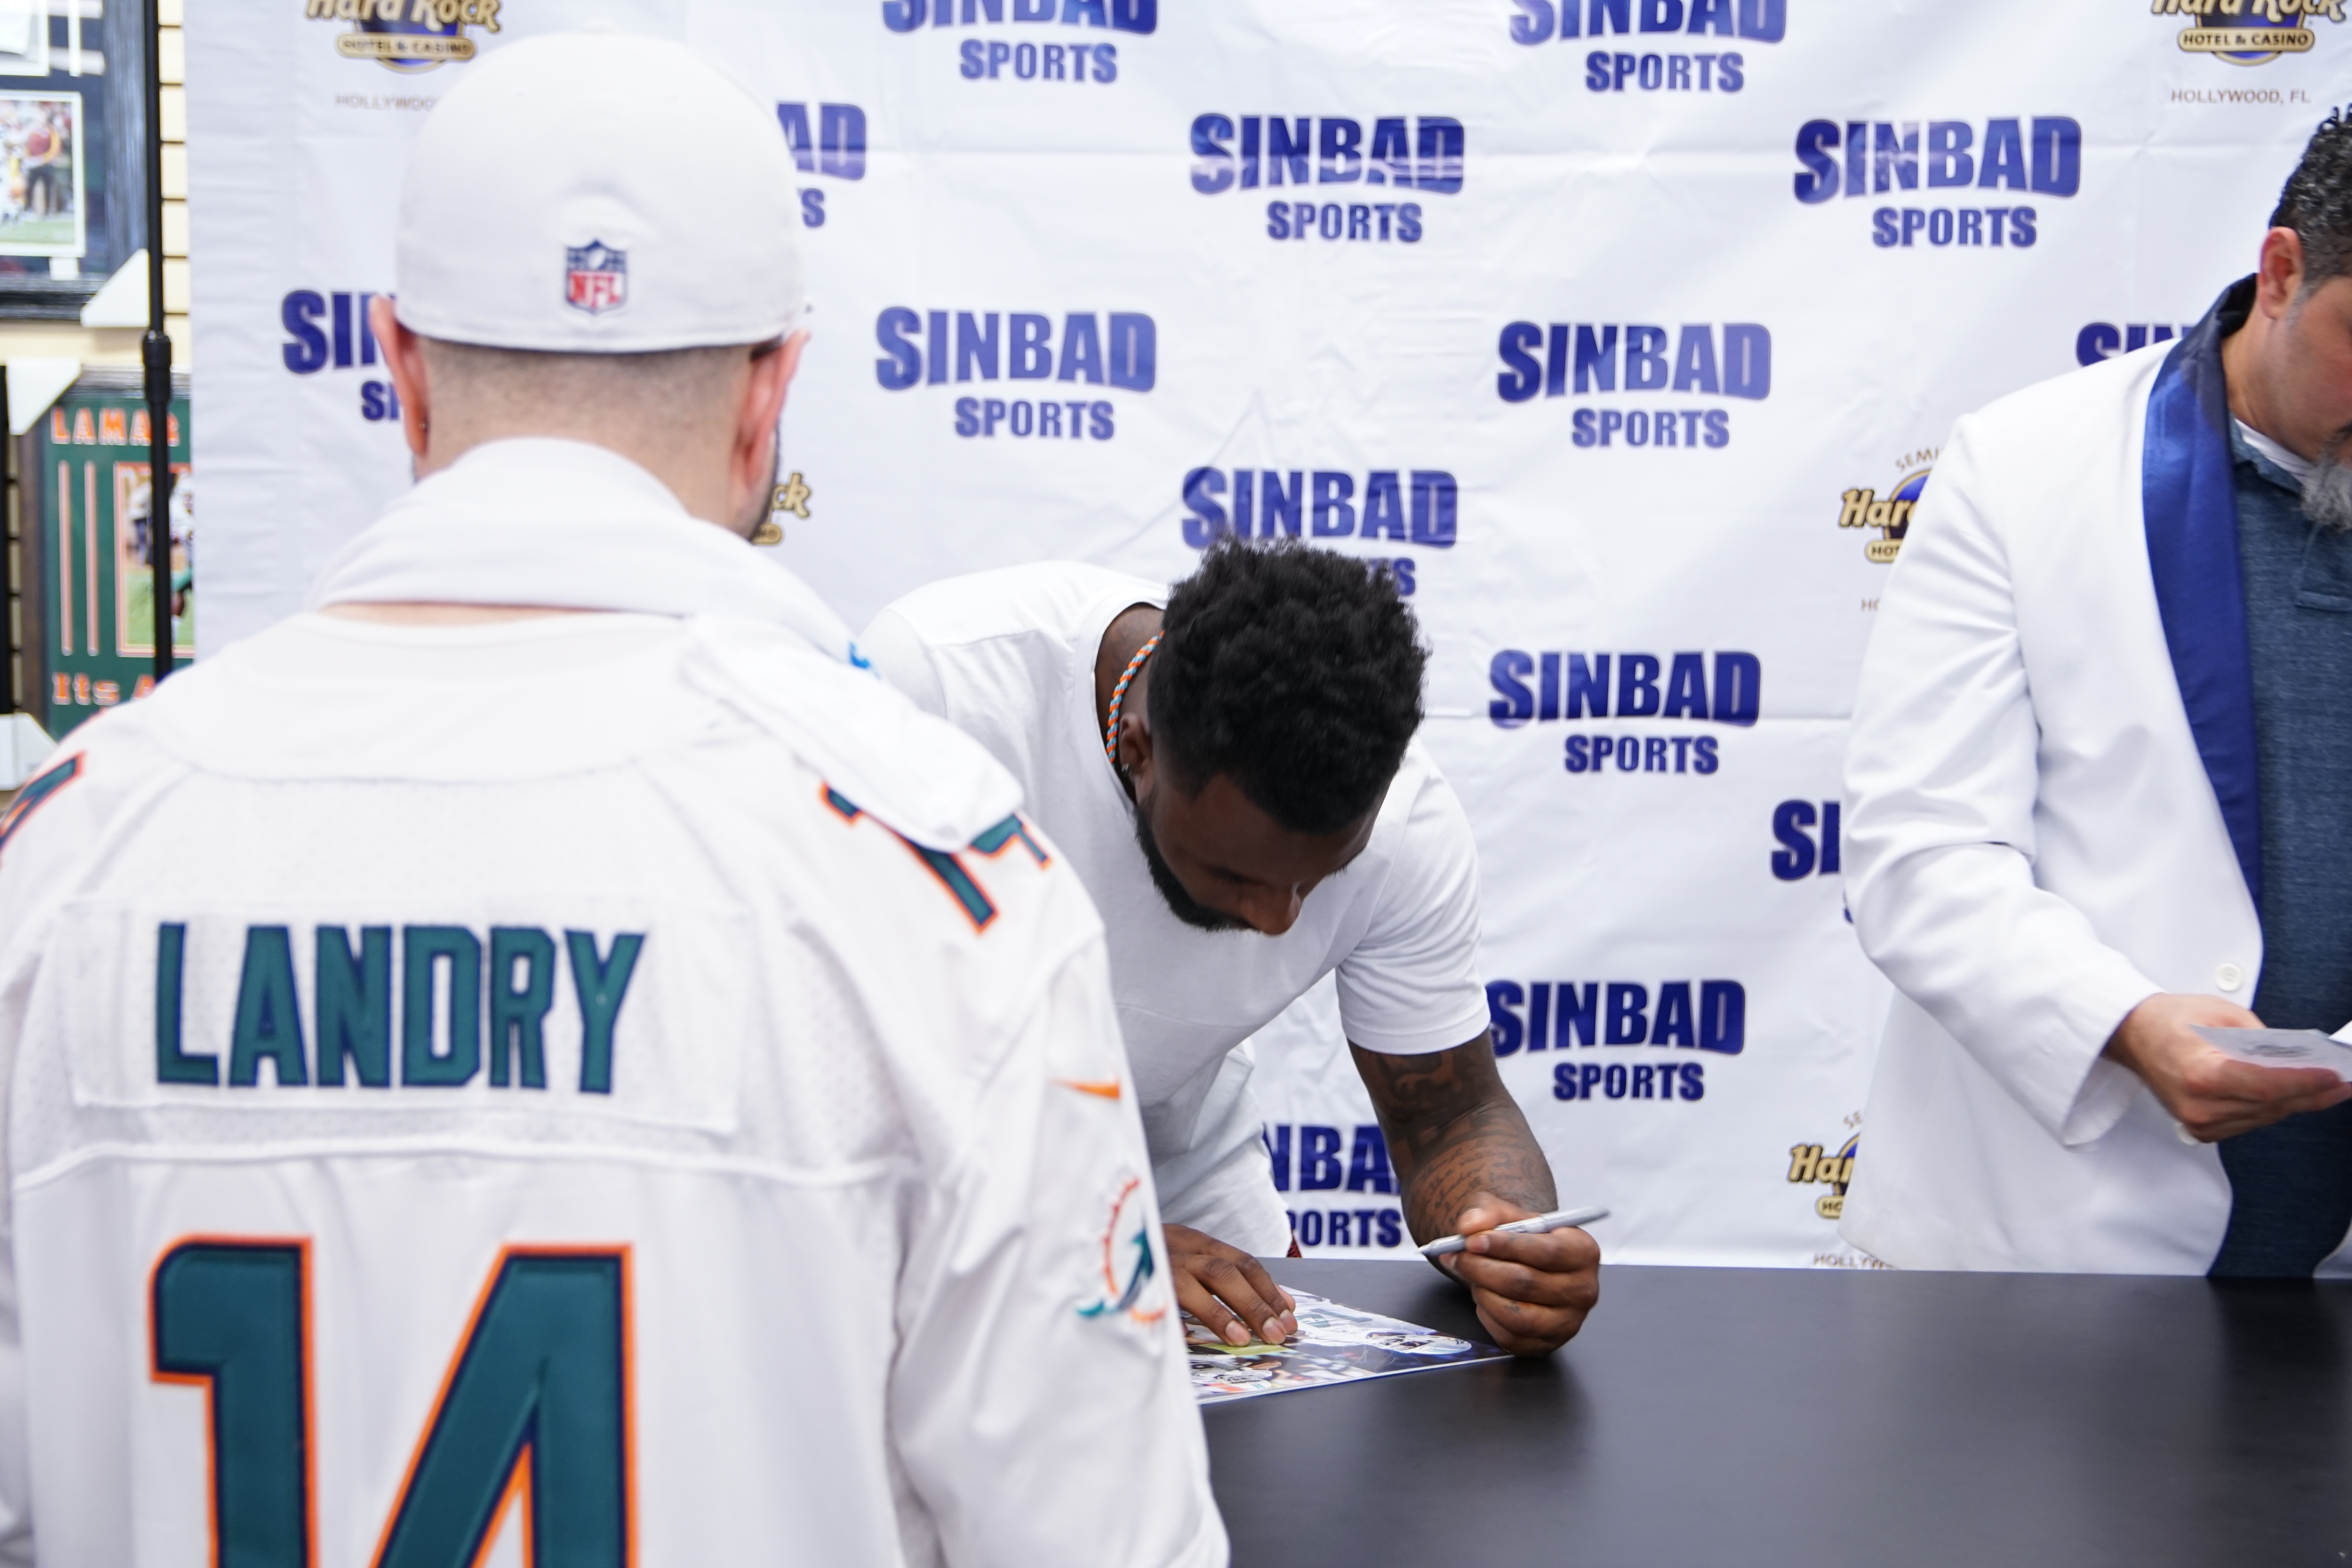 jarvis landry signing/autograph on jersey #14 at sinbad sports